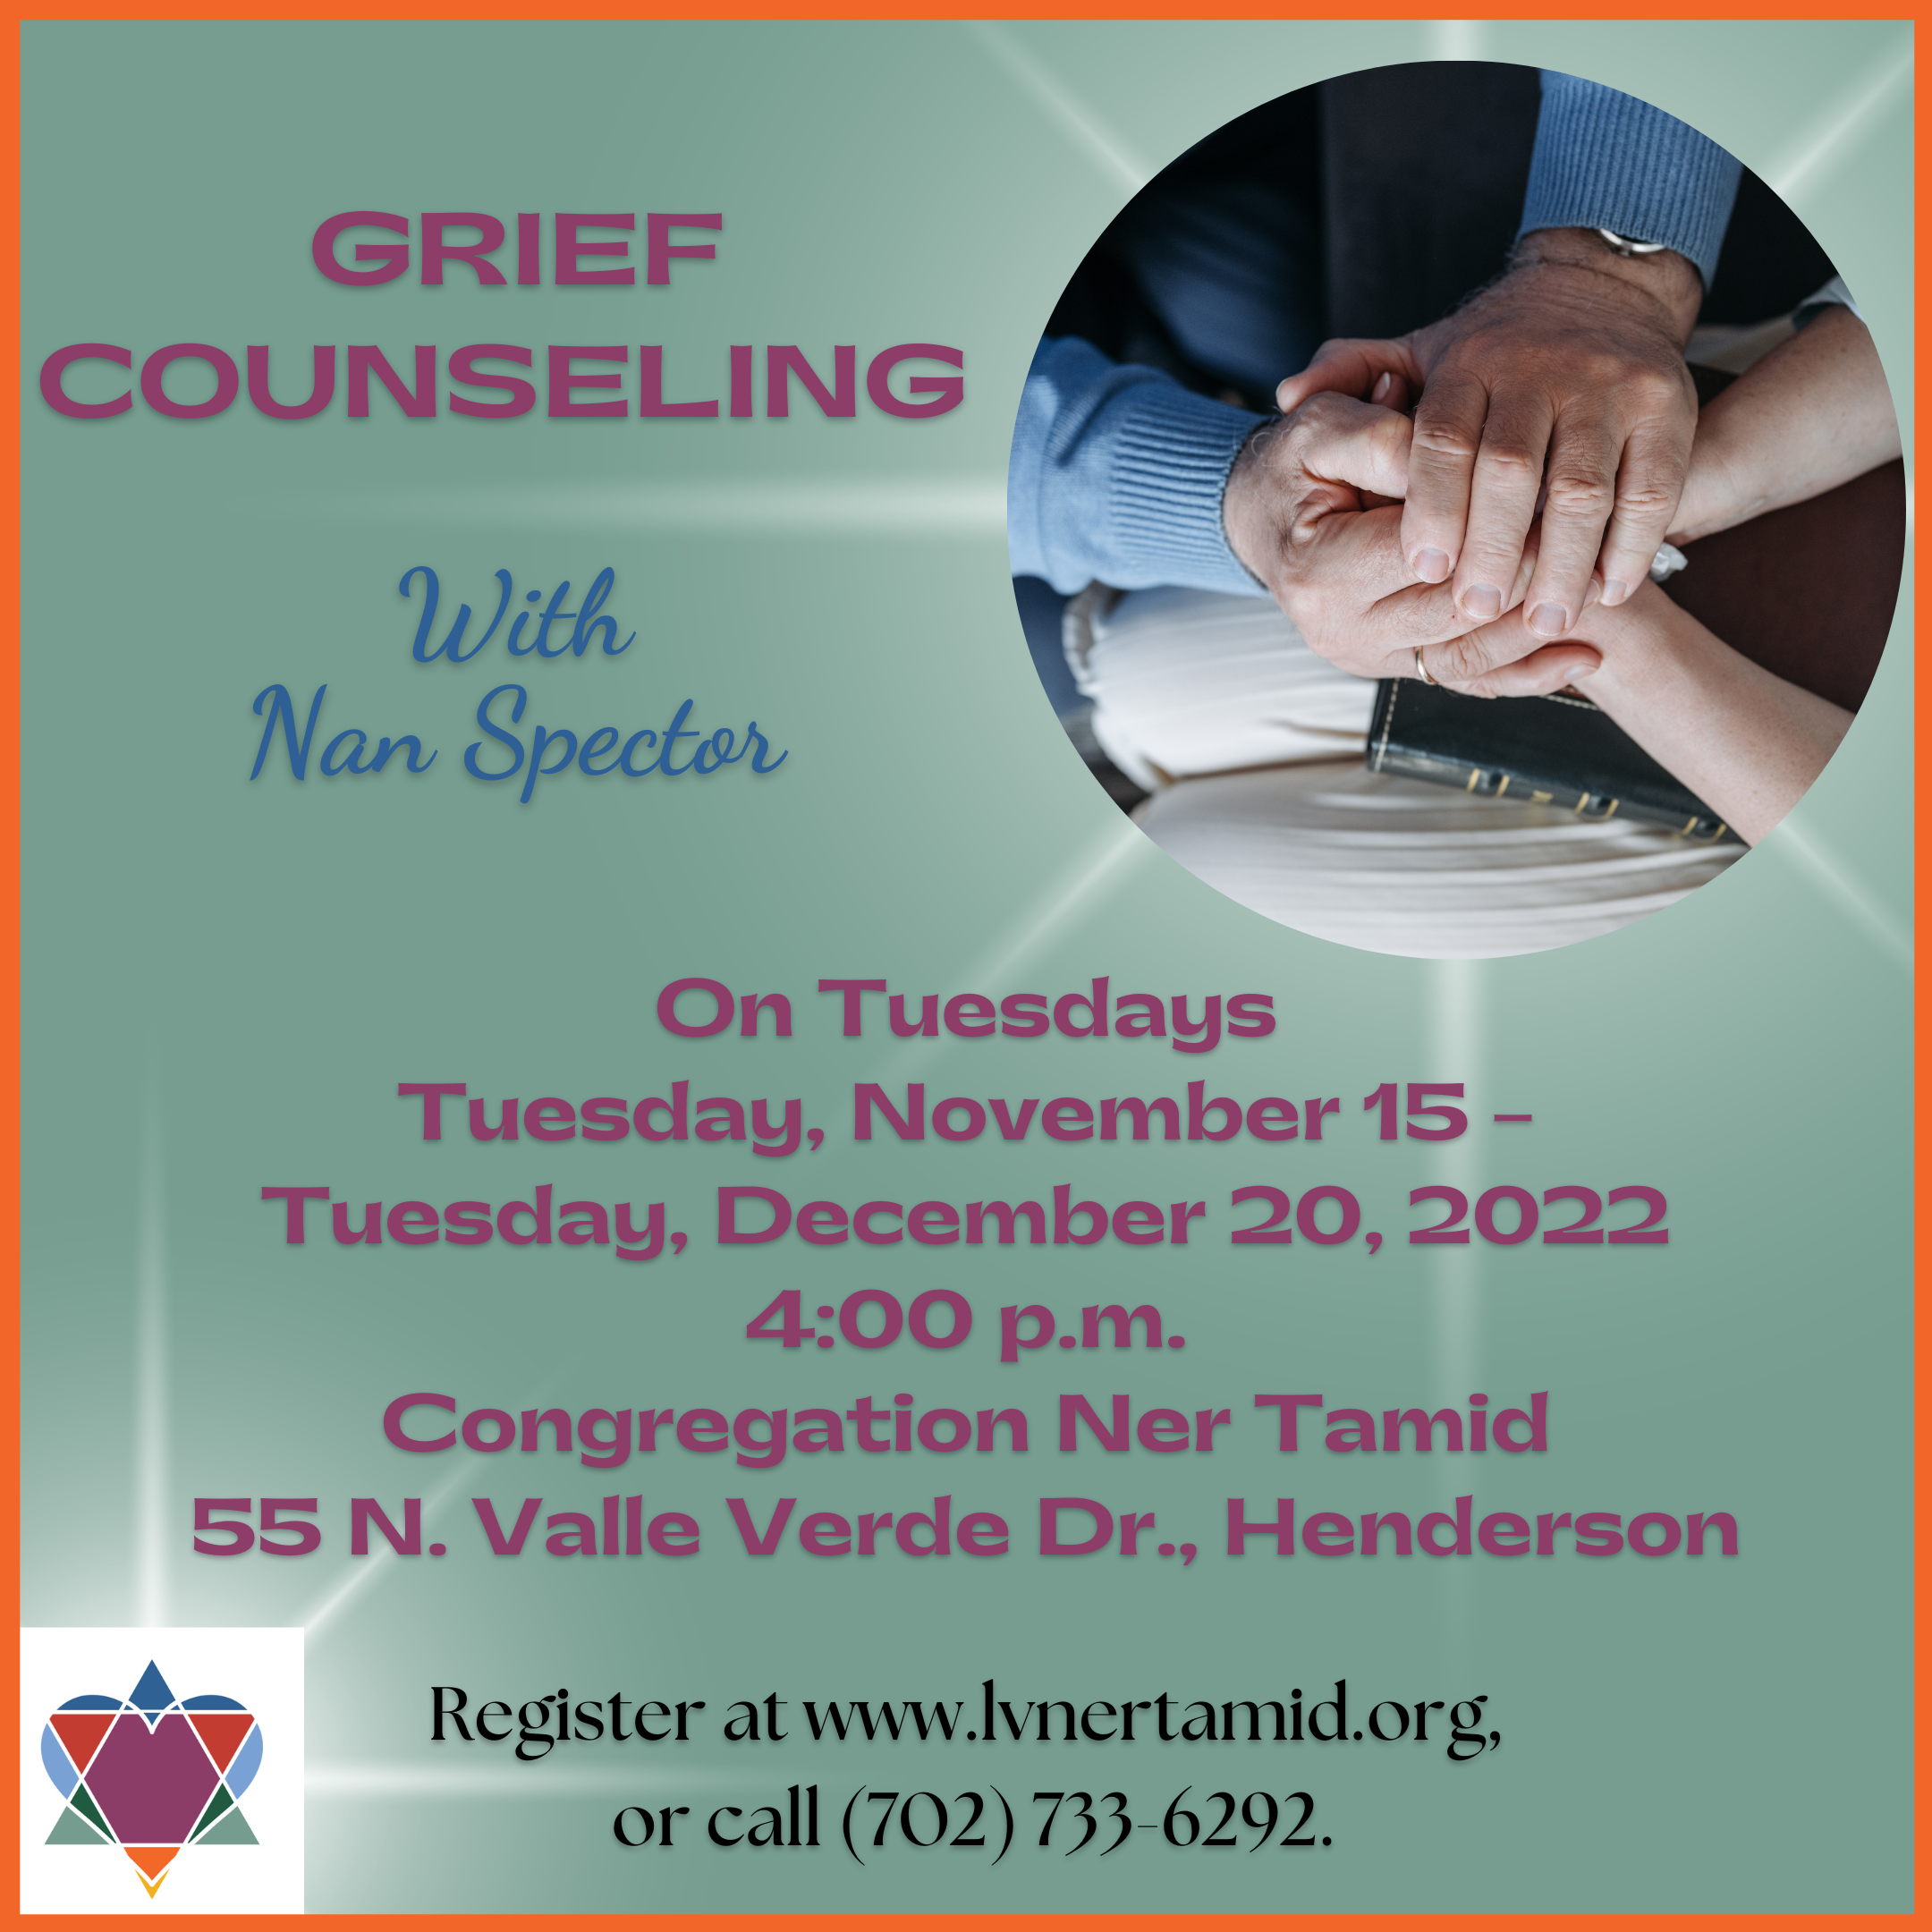 GRIEF COUNSELING